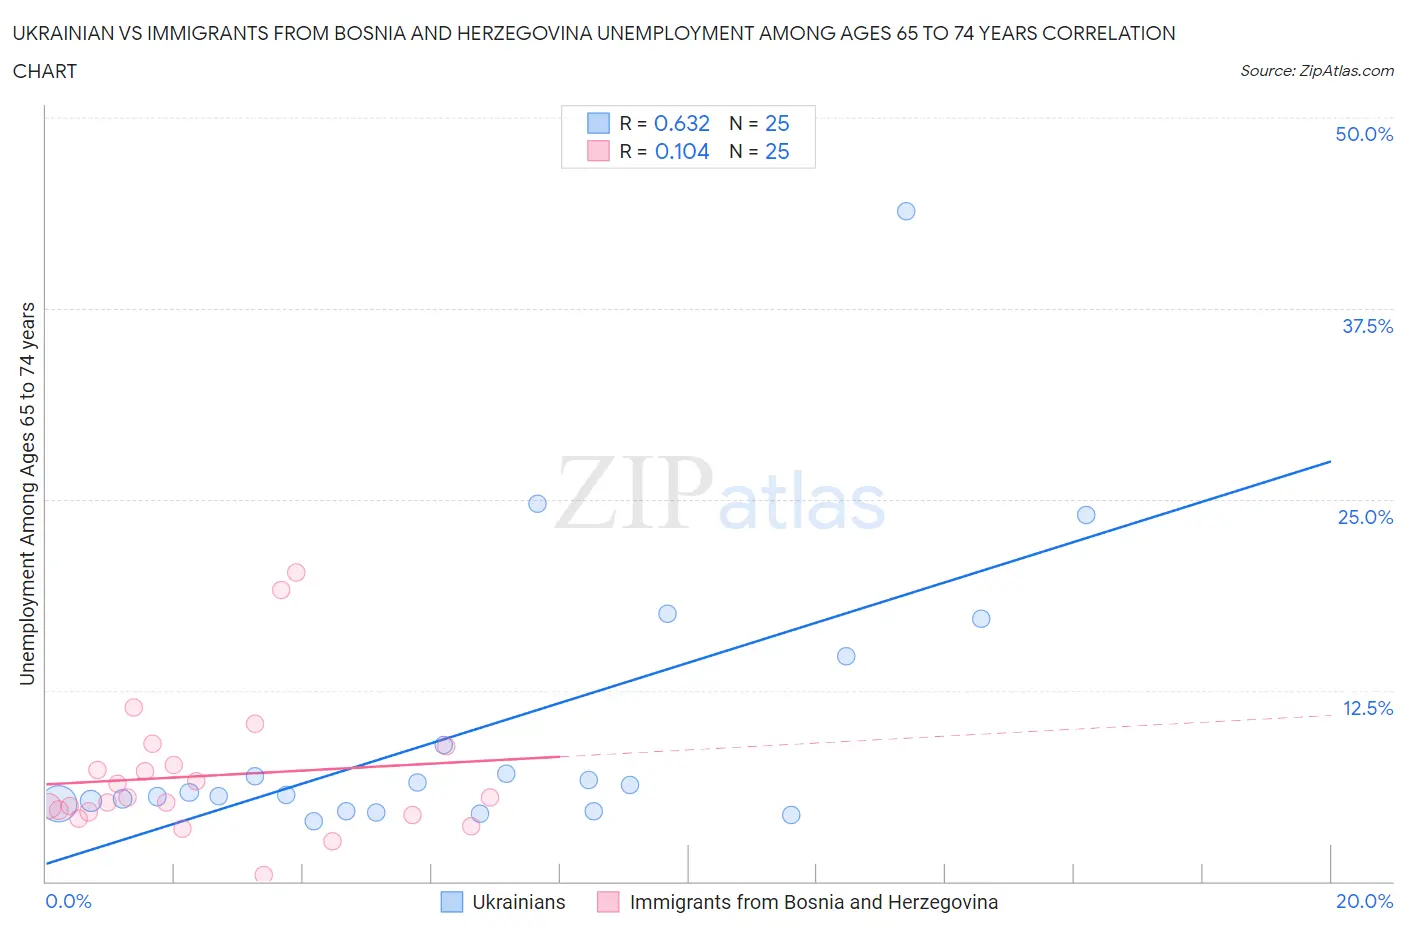 Ukrainian vs Immigrants from Bosnia and Herzegovina Unemployment Among Ages 65 to 74 years